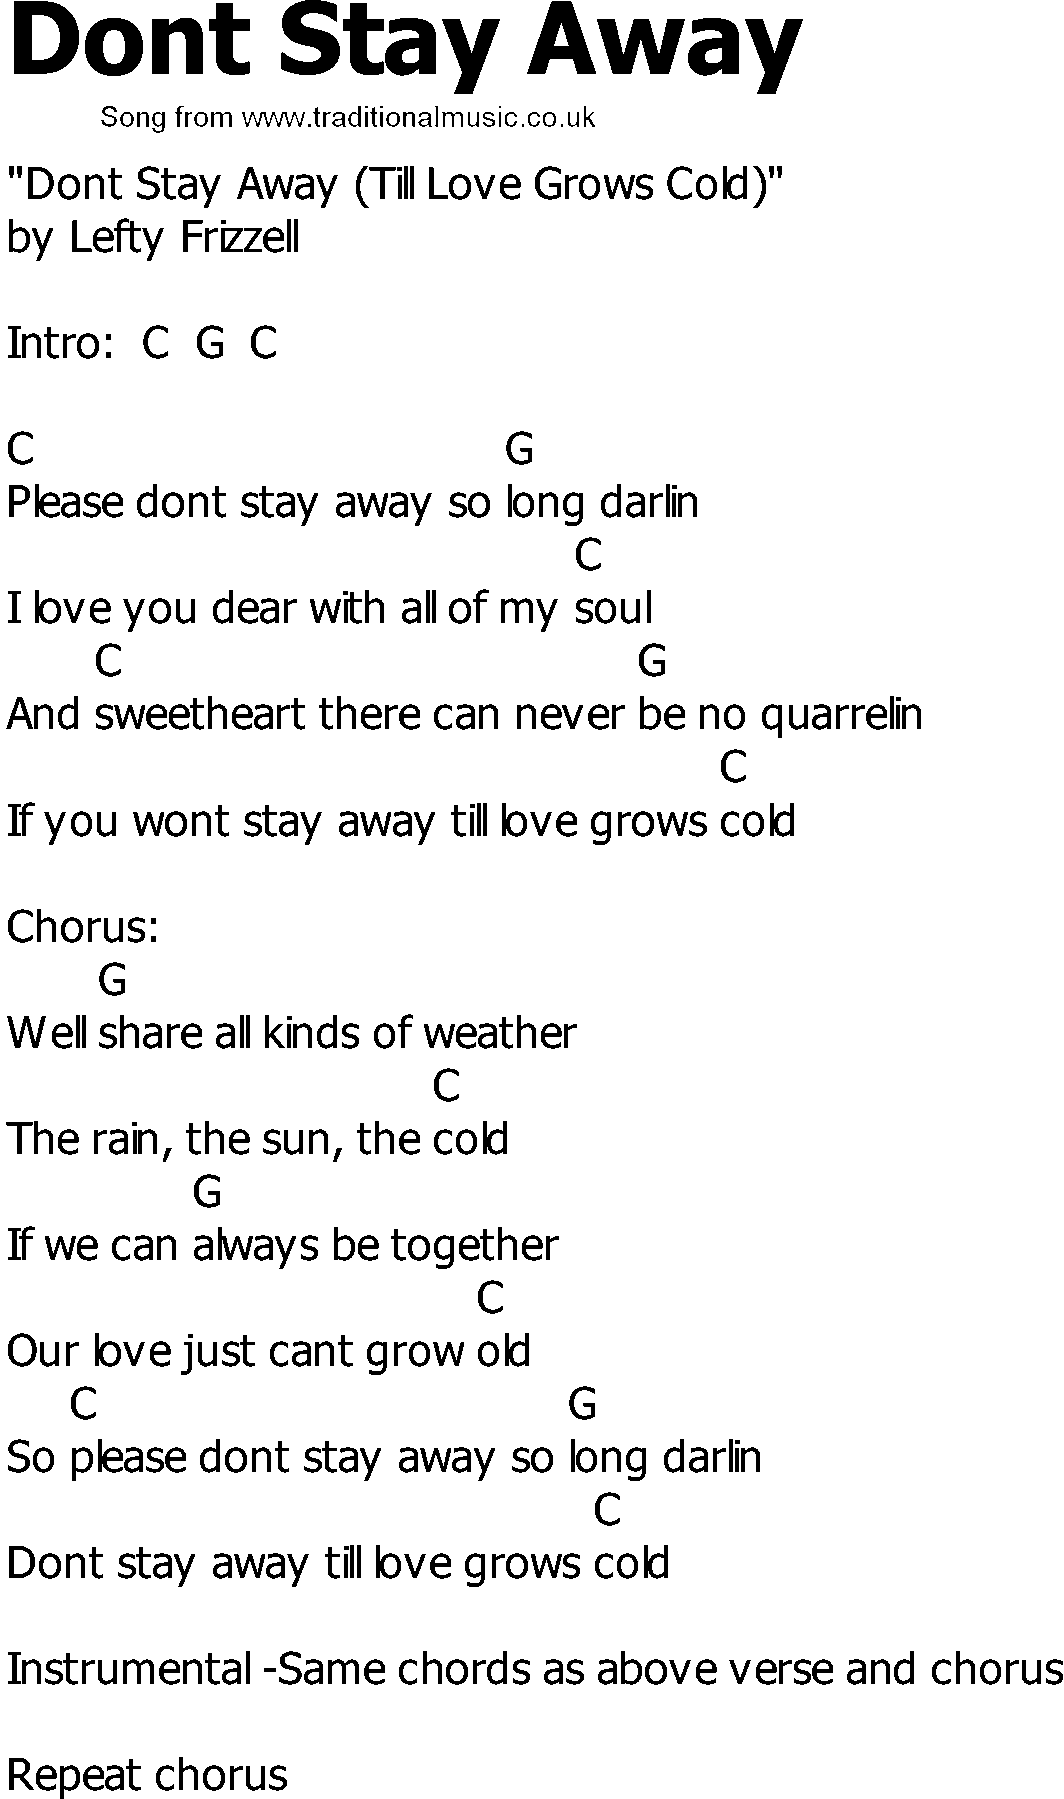 Old Country song lyrics with chords - Dont Stay Away